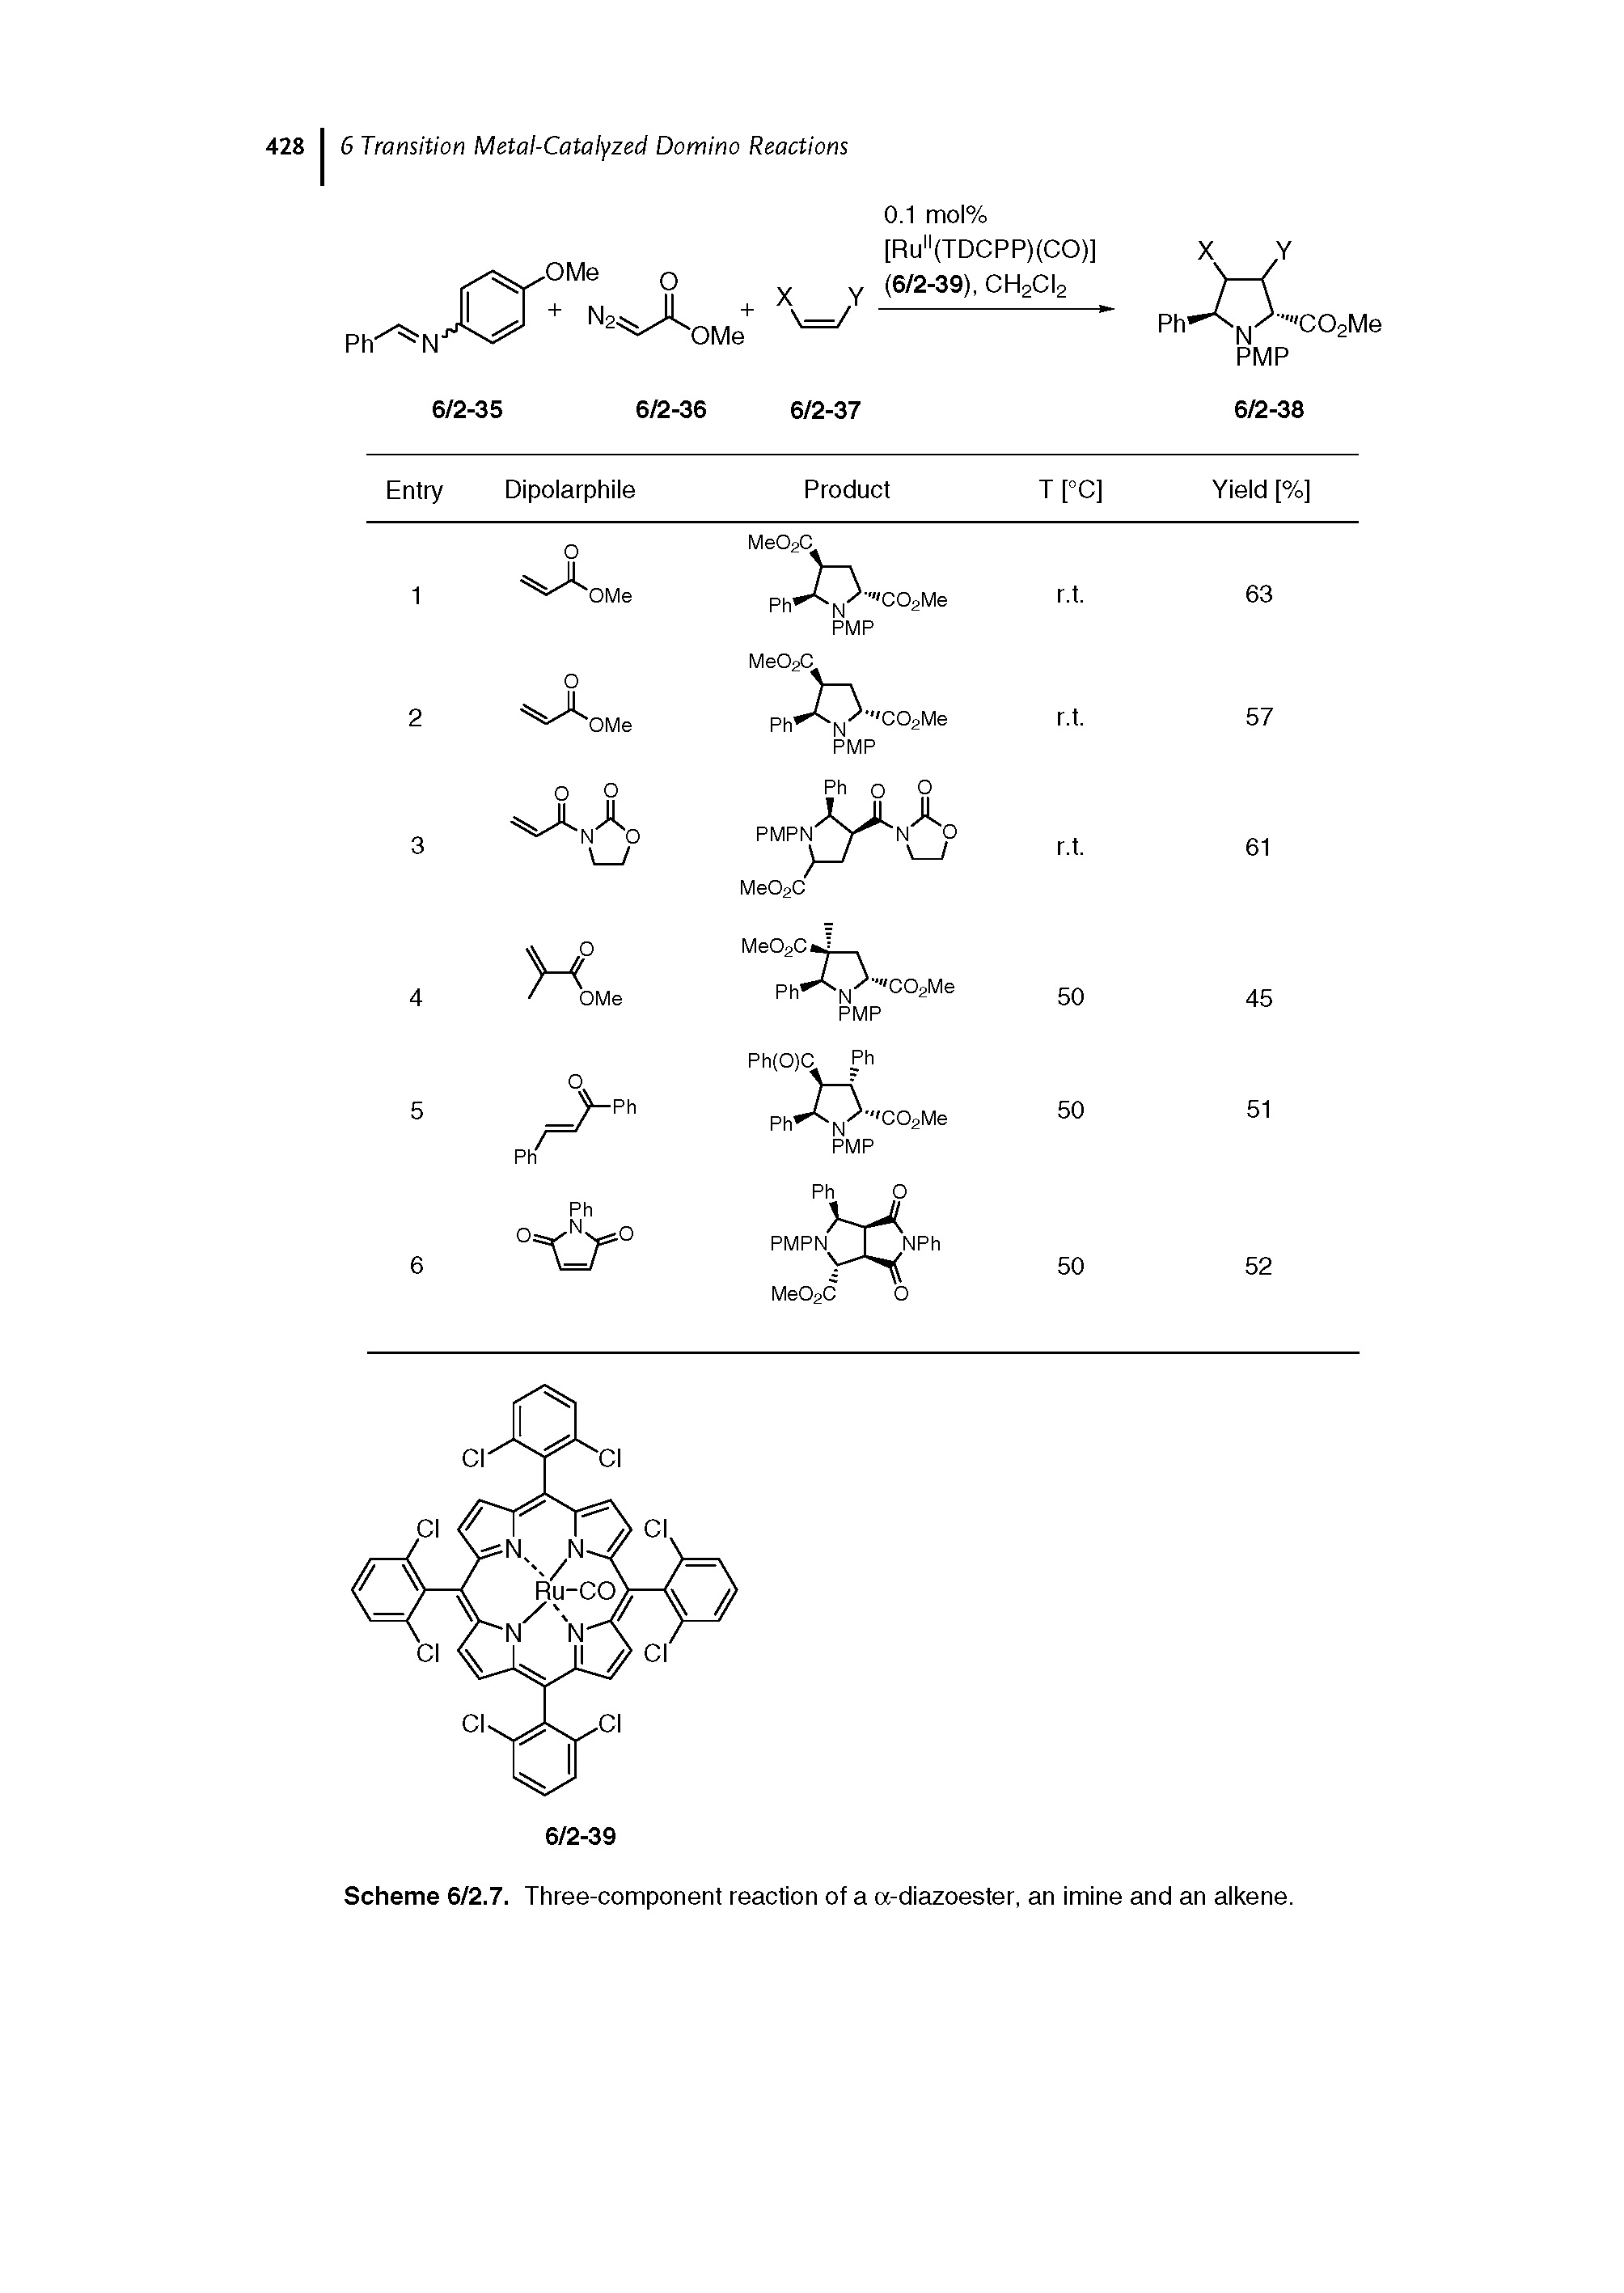 Scheme 6/2.7. Three-component reaction of a a-diazoester, an imine and an alkene.